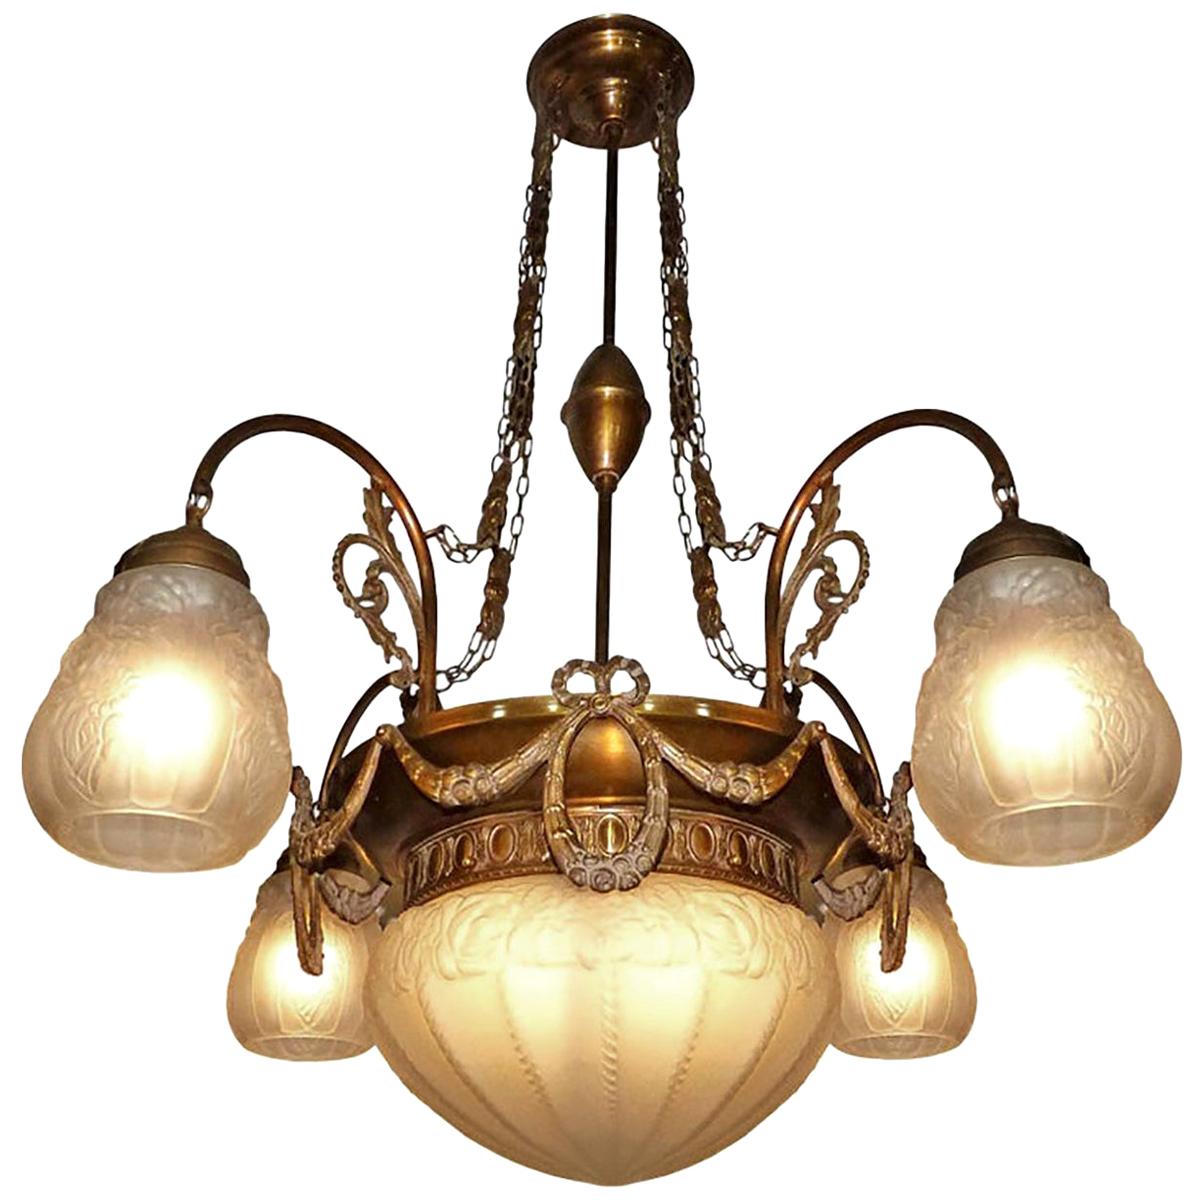 Large French Art Deco and Art Nouveau Brass and Frosted Glass 5-Light Chandelier